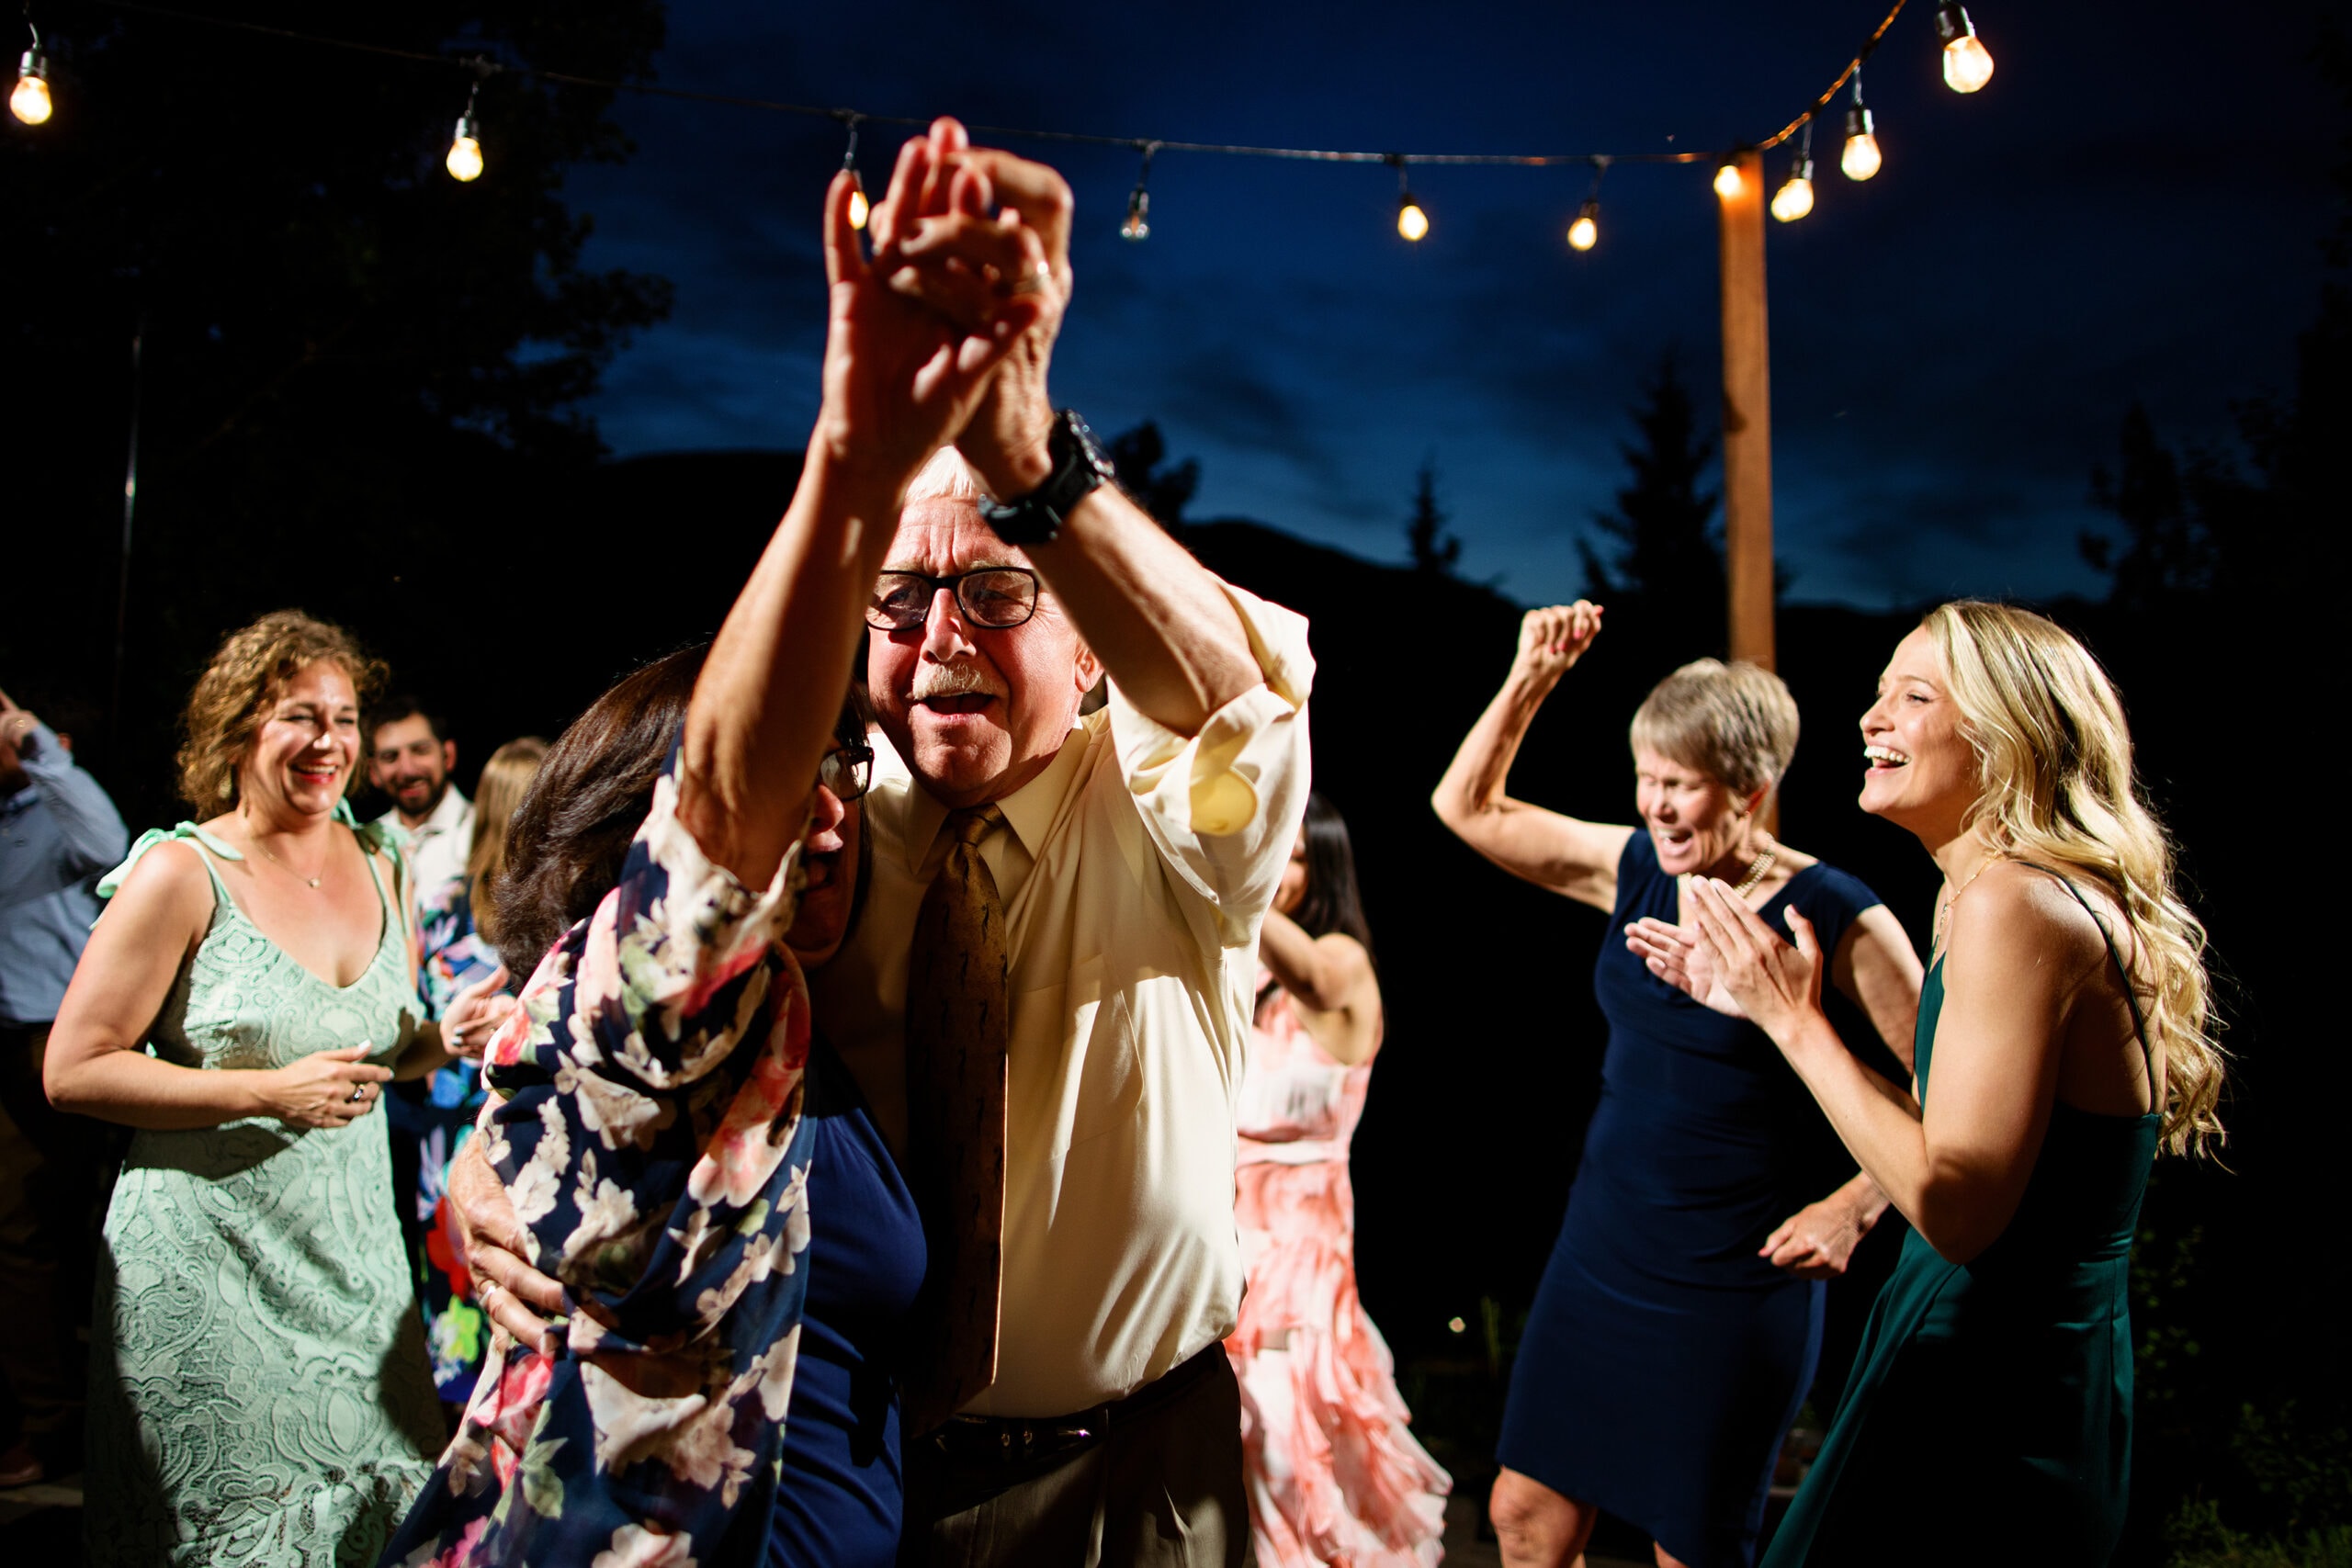 Guests dance during a wedding reception at Mountain Wedding Garden in Crested Butte